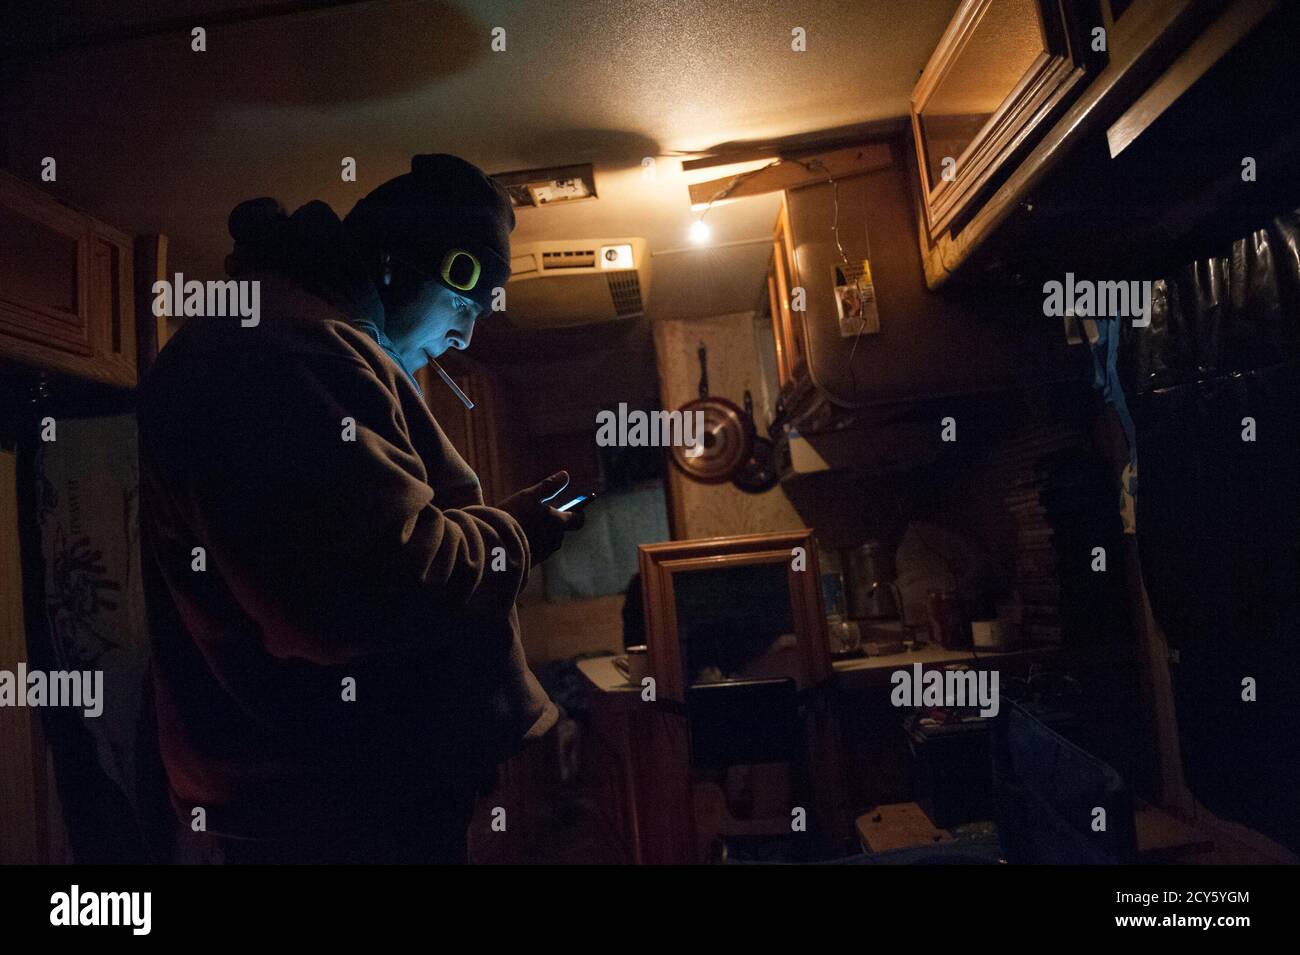 Bazileo Hernandez looks at his mobile phone in an RV parked on the streets of Williston, North Dakota January 13, 2015. A man offered to let Hernandez and his friends stay in the vehicle with him overnight since temperatures outside were below zero. The trio had arrived in town earlier that day with no jobs and nowhere to stay, but hoped to find work in the Bakken oil fields. Like so many before them, Terra Green, Jeff Williamson and Bazileo Hernandez came to North Dakota's oil country seeking a better life. They just came too late. Itinerant, unskilled workers could as recently as last spring Stock Photo